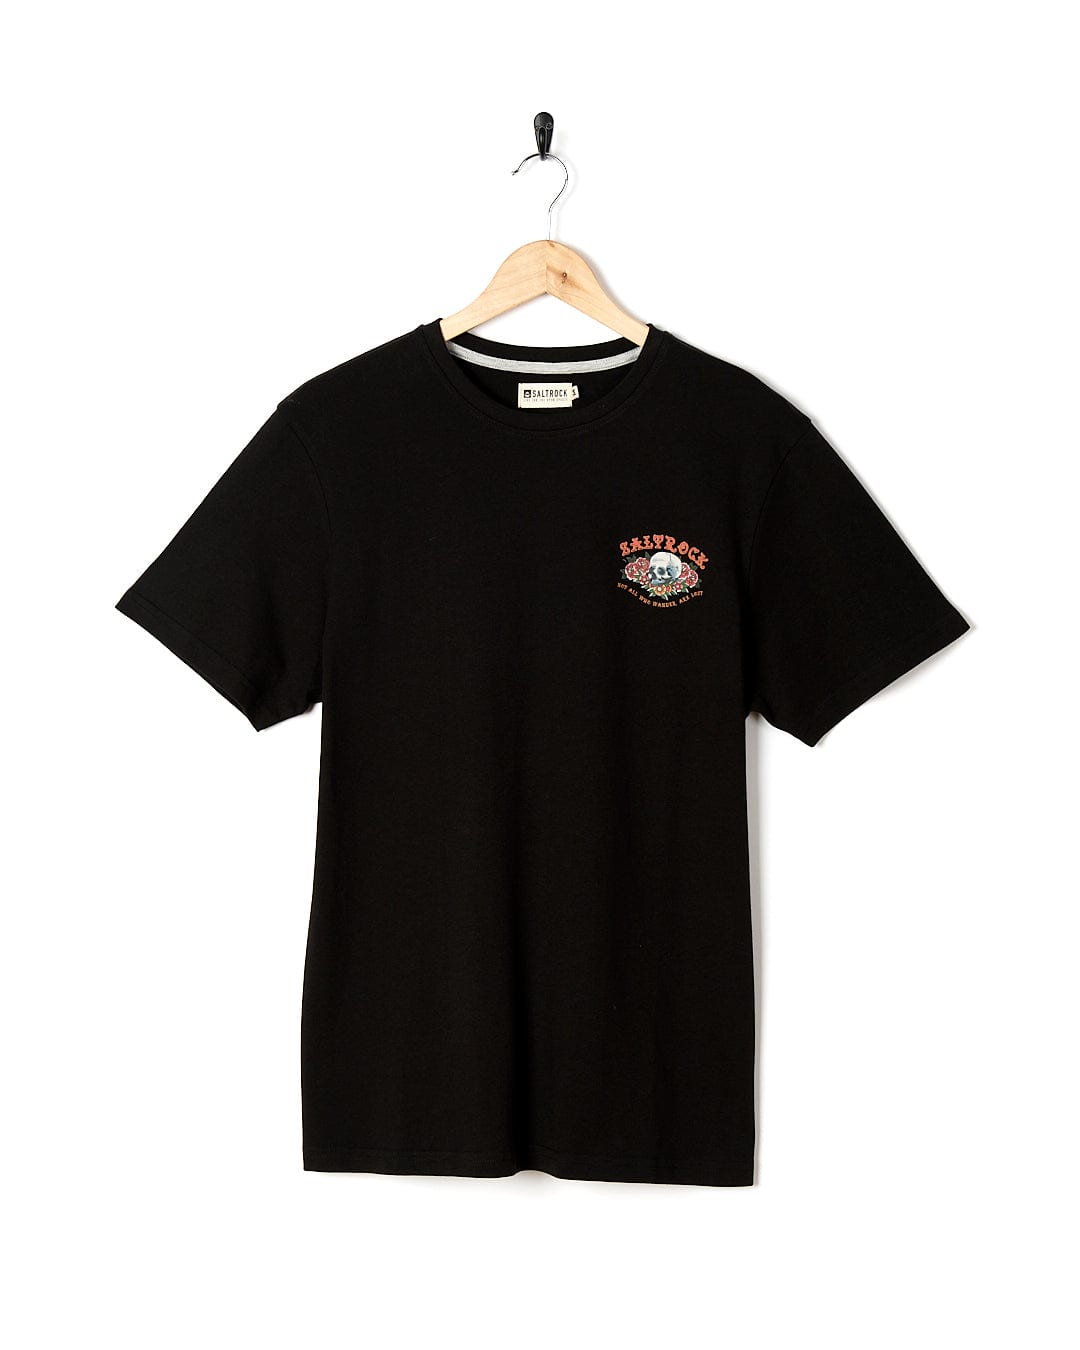 A Tattoo Island - Mens Short Sleeve T-Shirt - Black with a logo on it by Saltrock.